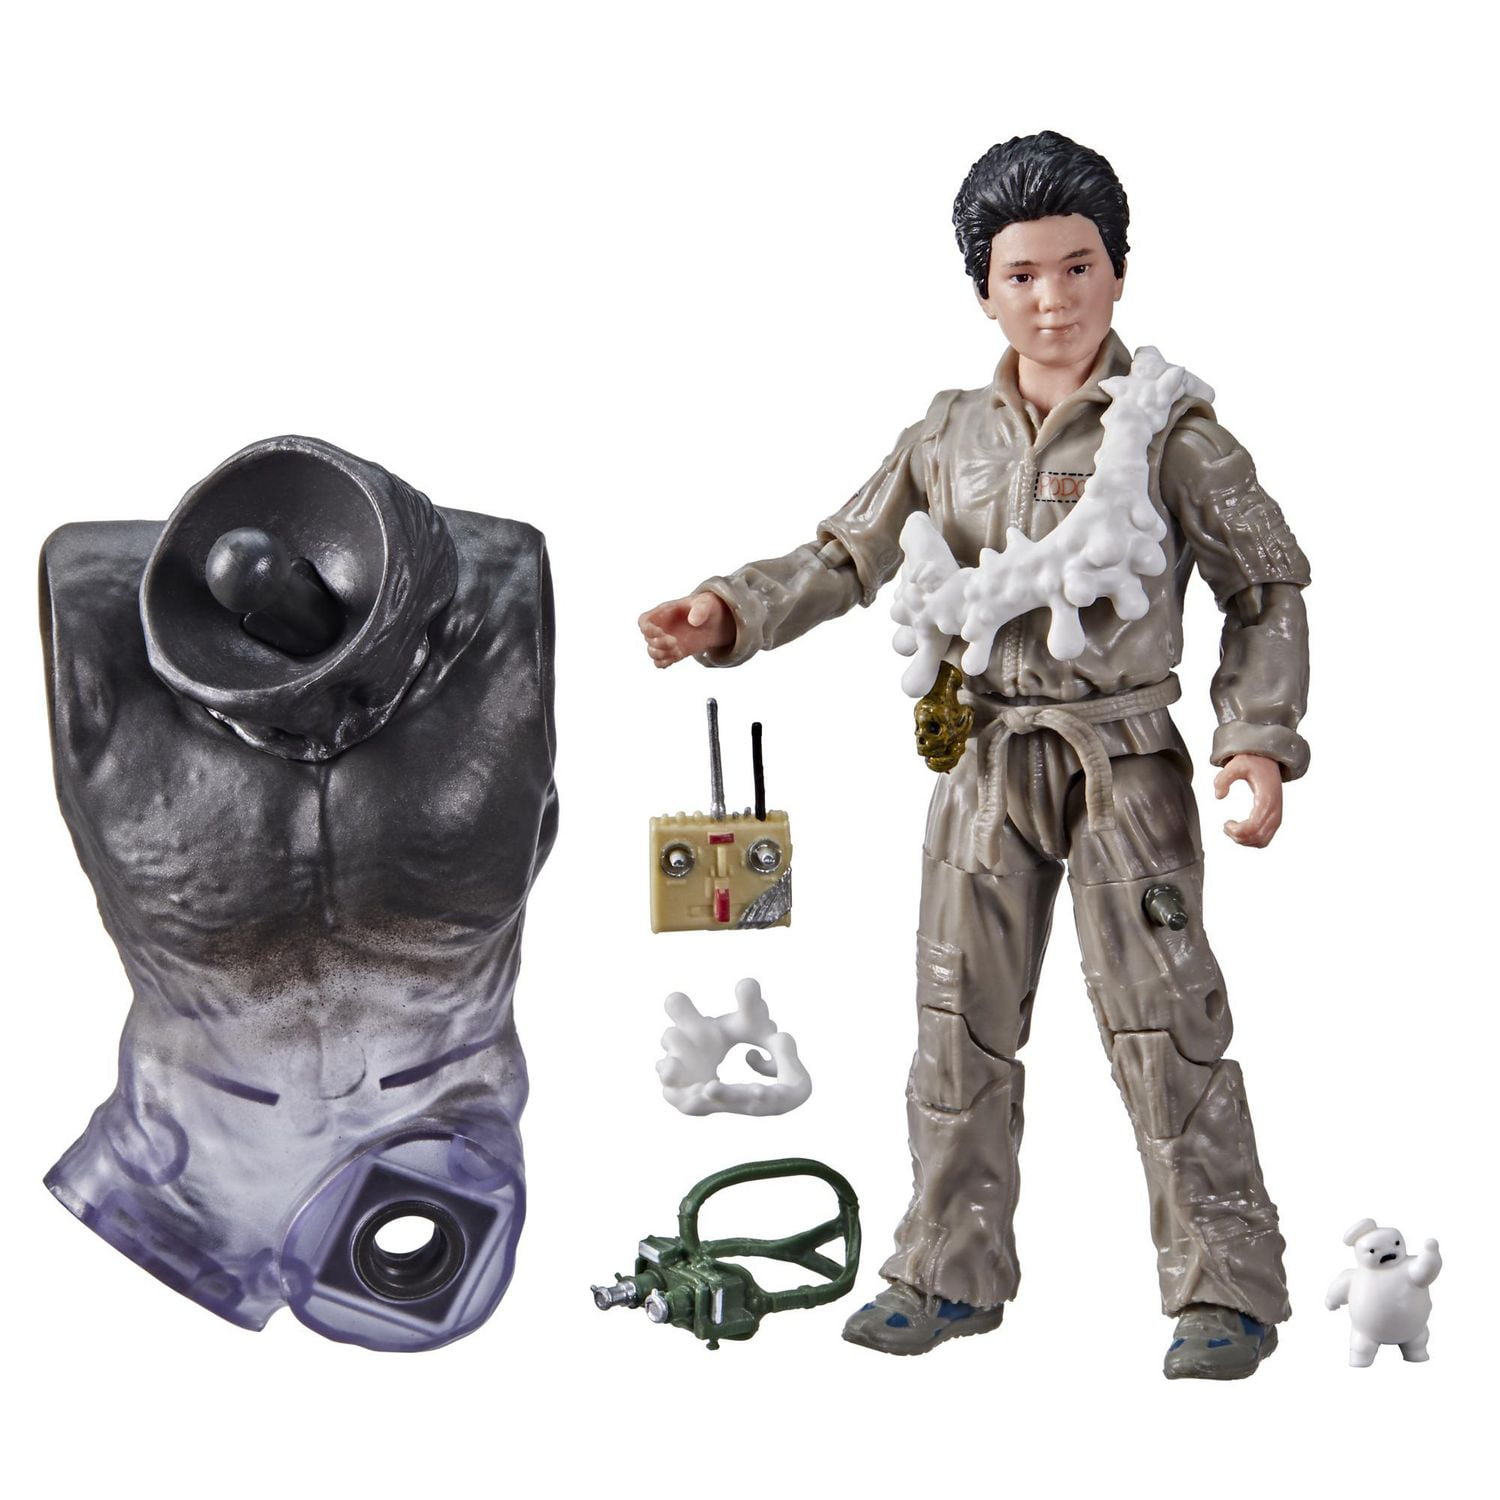 Ghostbusters Plasma Series Podcast Toy 6-Inch-Scale Collectible